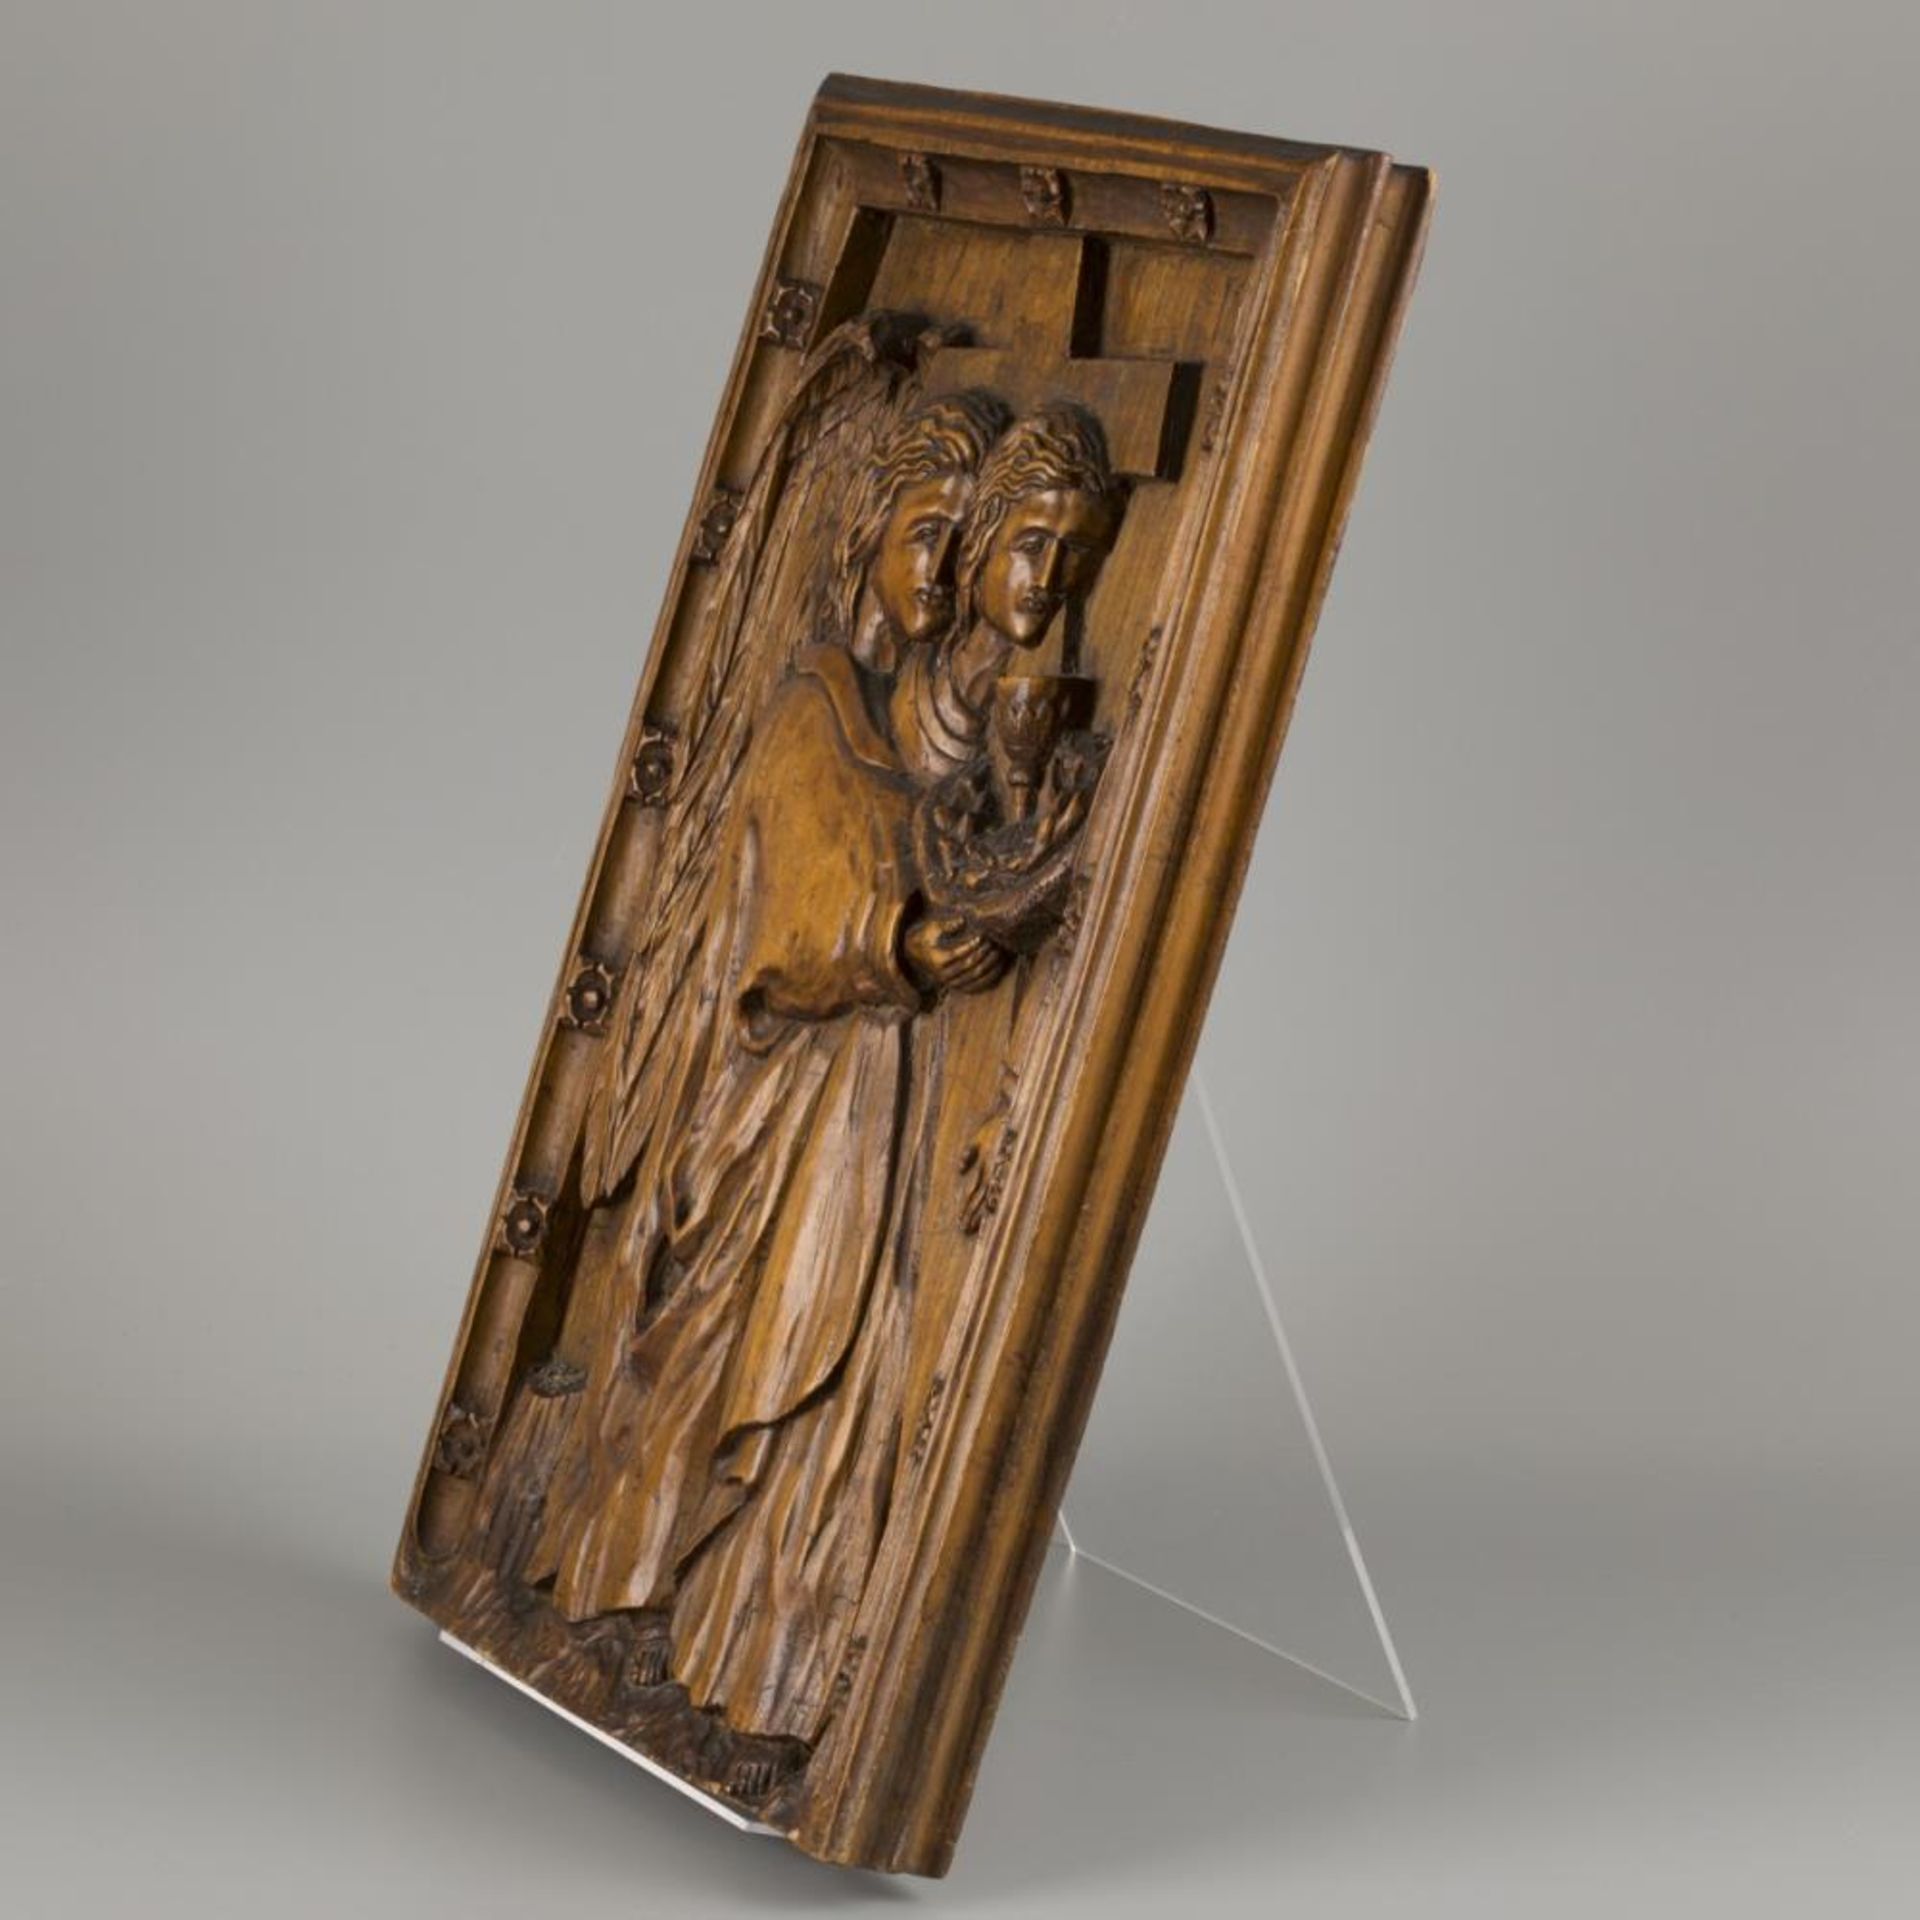 An carved oak bas-relief depicting St. john the Baptist with arma sacra, ca. 1900. - Image 2 of 3